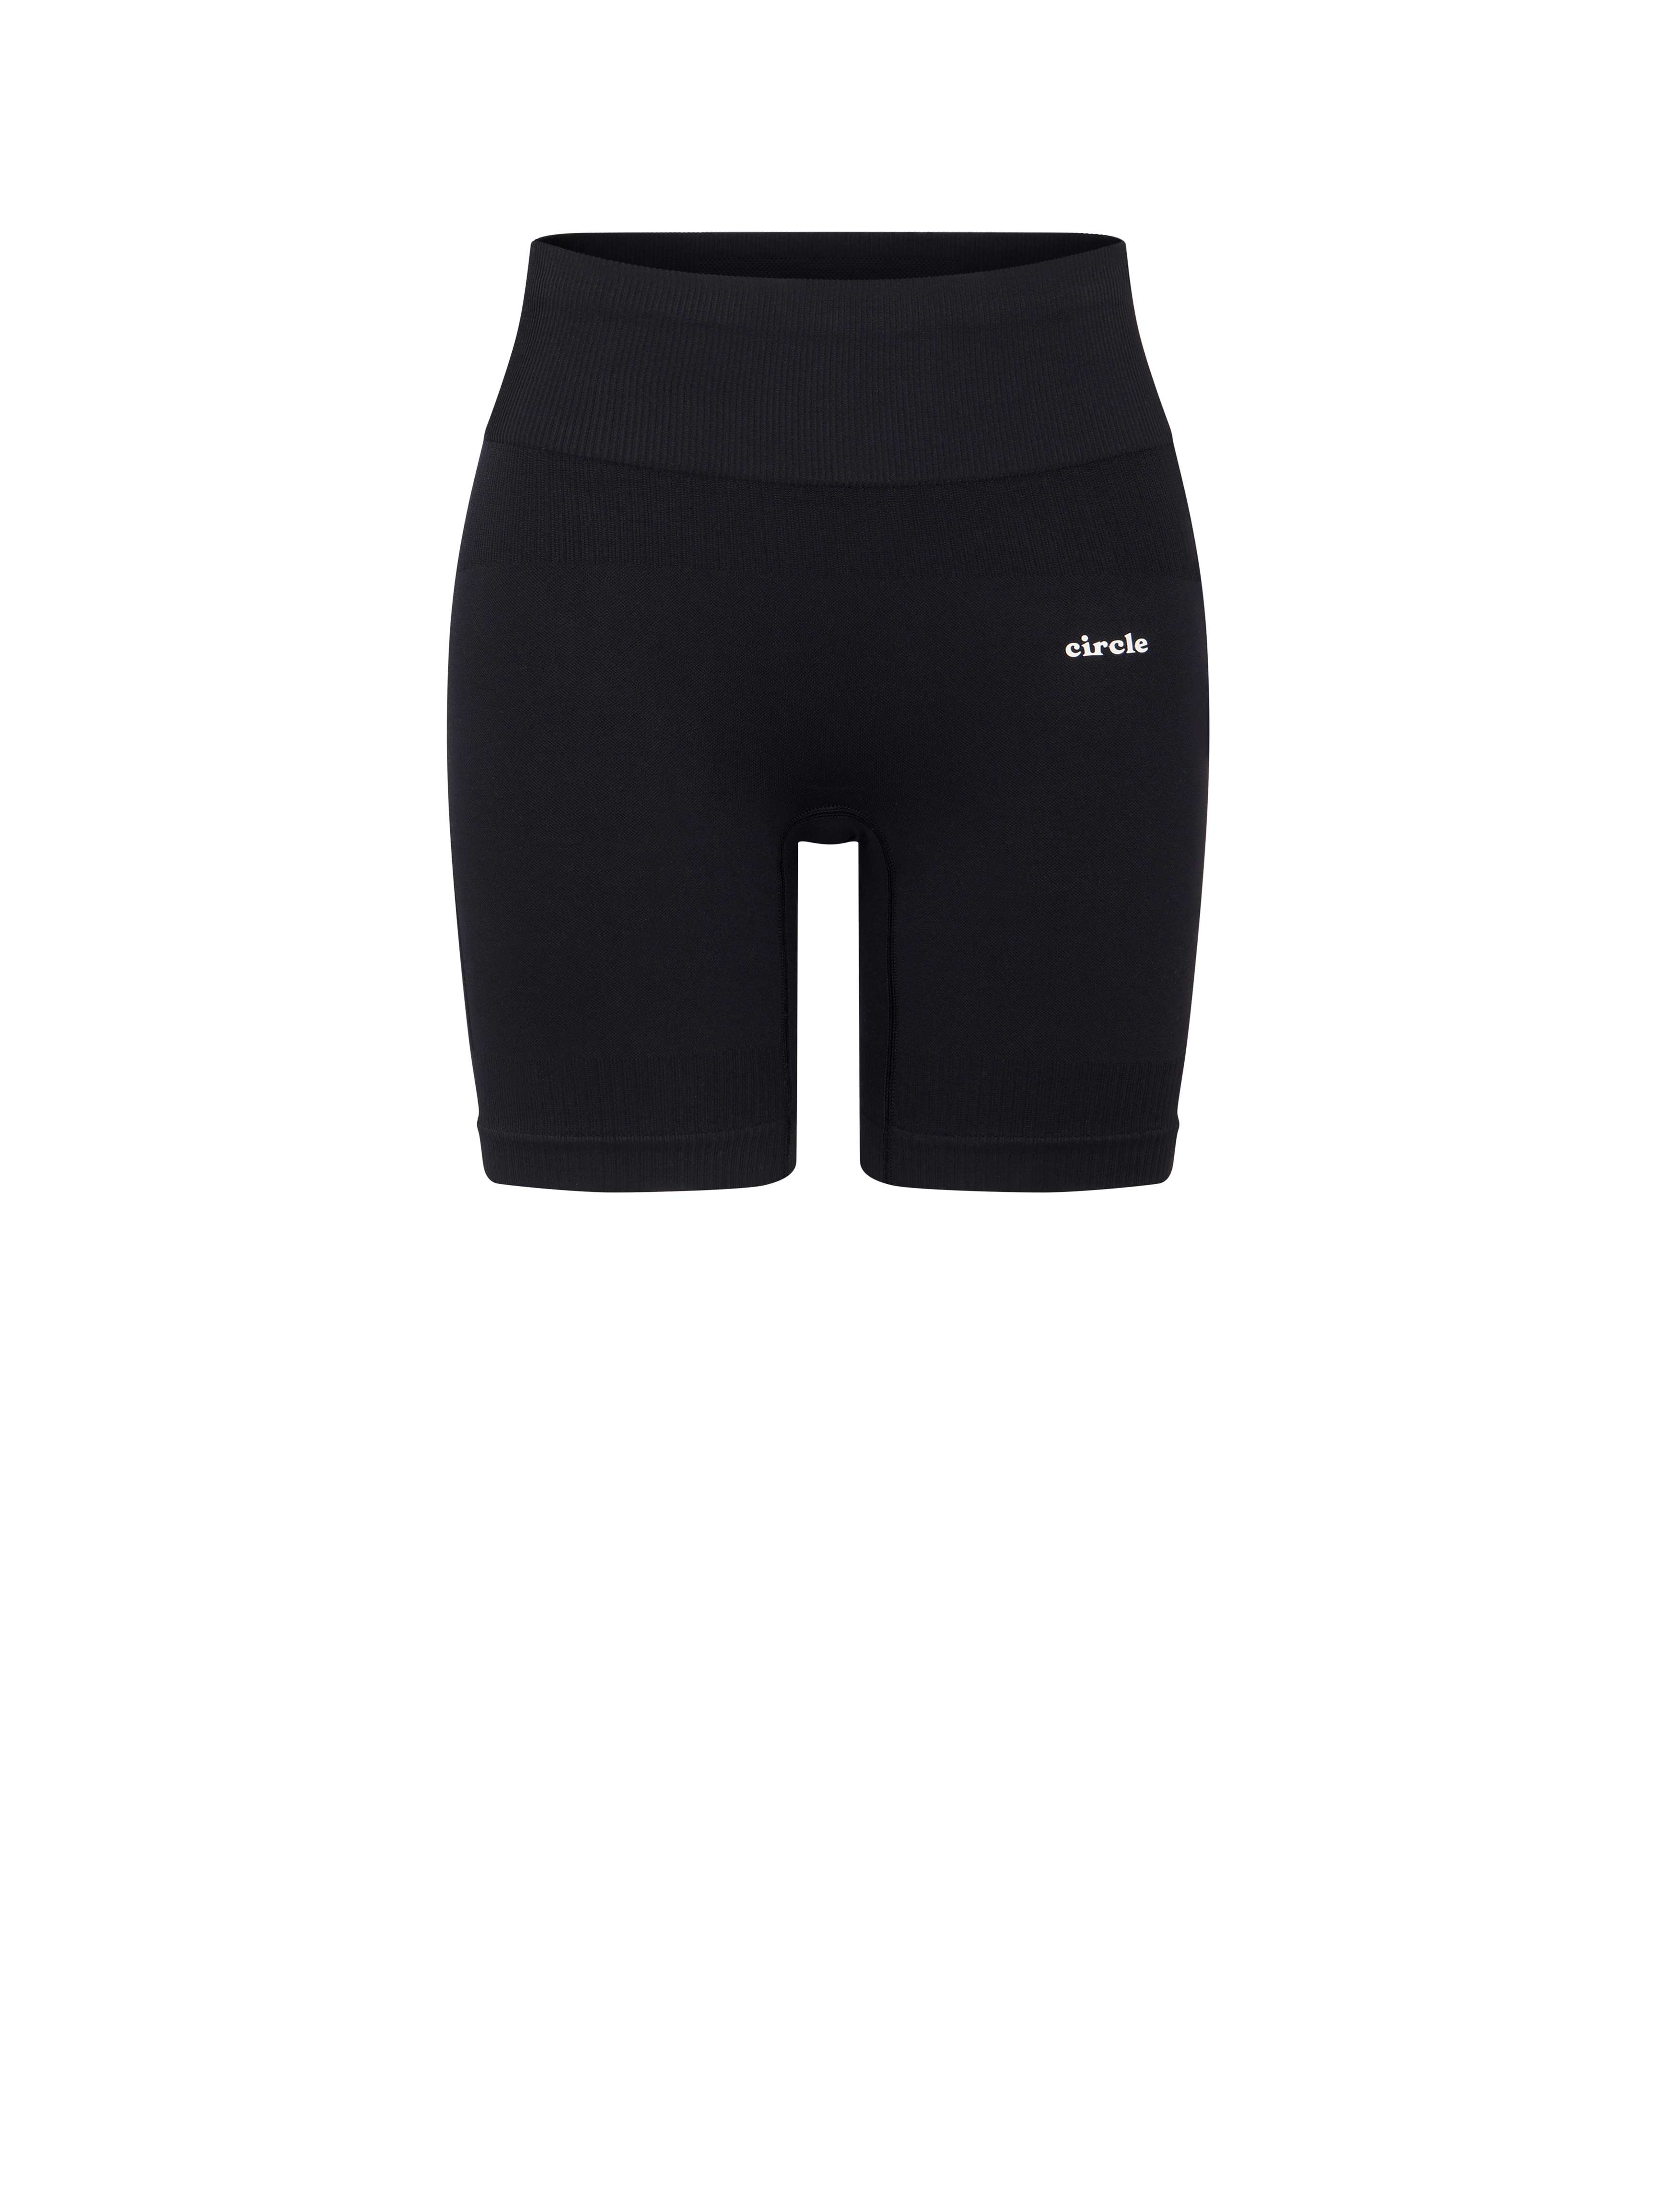 Rib and mesh details for optimal support and better breathability. Slim fit and elastic waistband for better support during exercise. 	